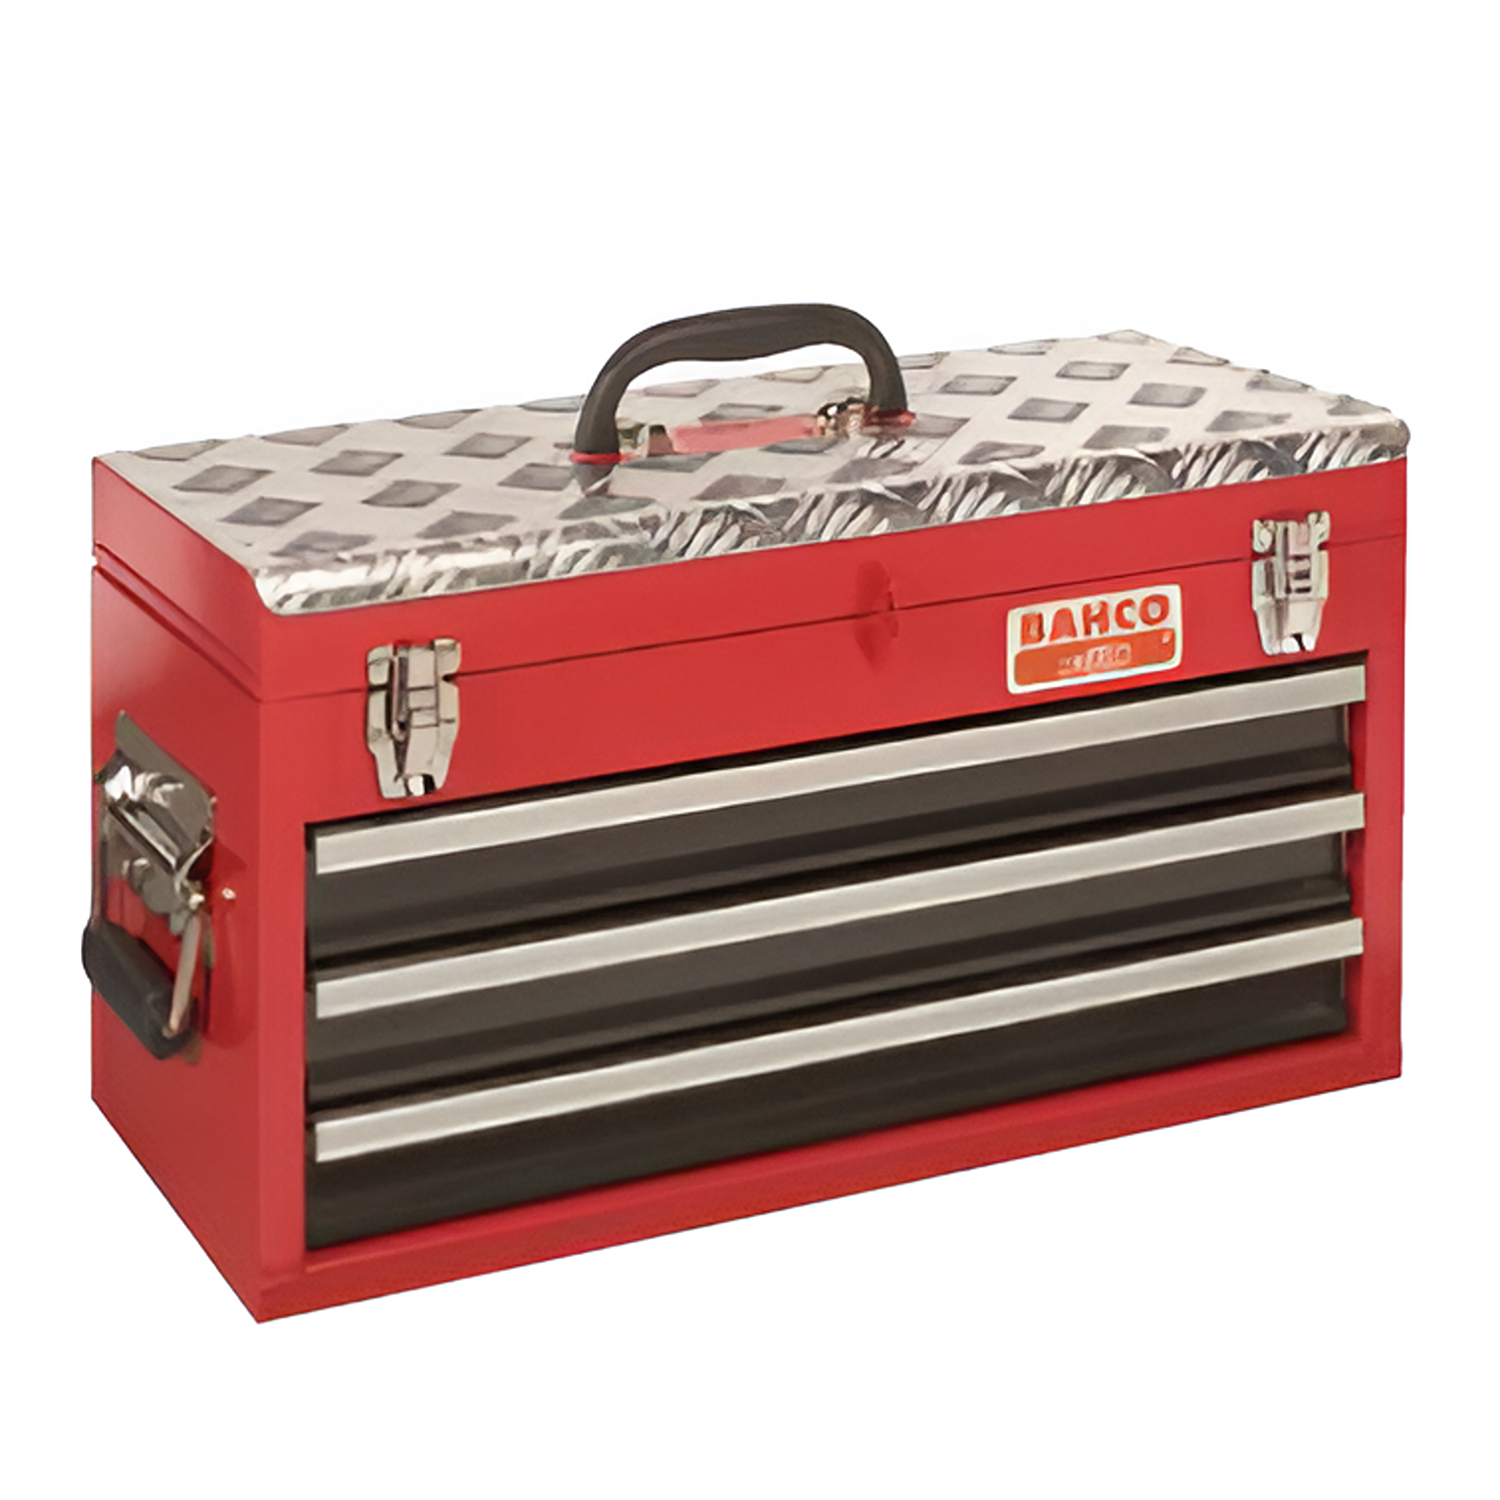 BAHCO 1484THD3RB Heavy Duty Metallic Tool Boxes with 3 Drawers - Premium Metallic Tool Boxes from BAHCO - Shop now at Yew Aik.